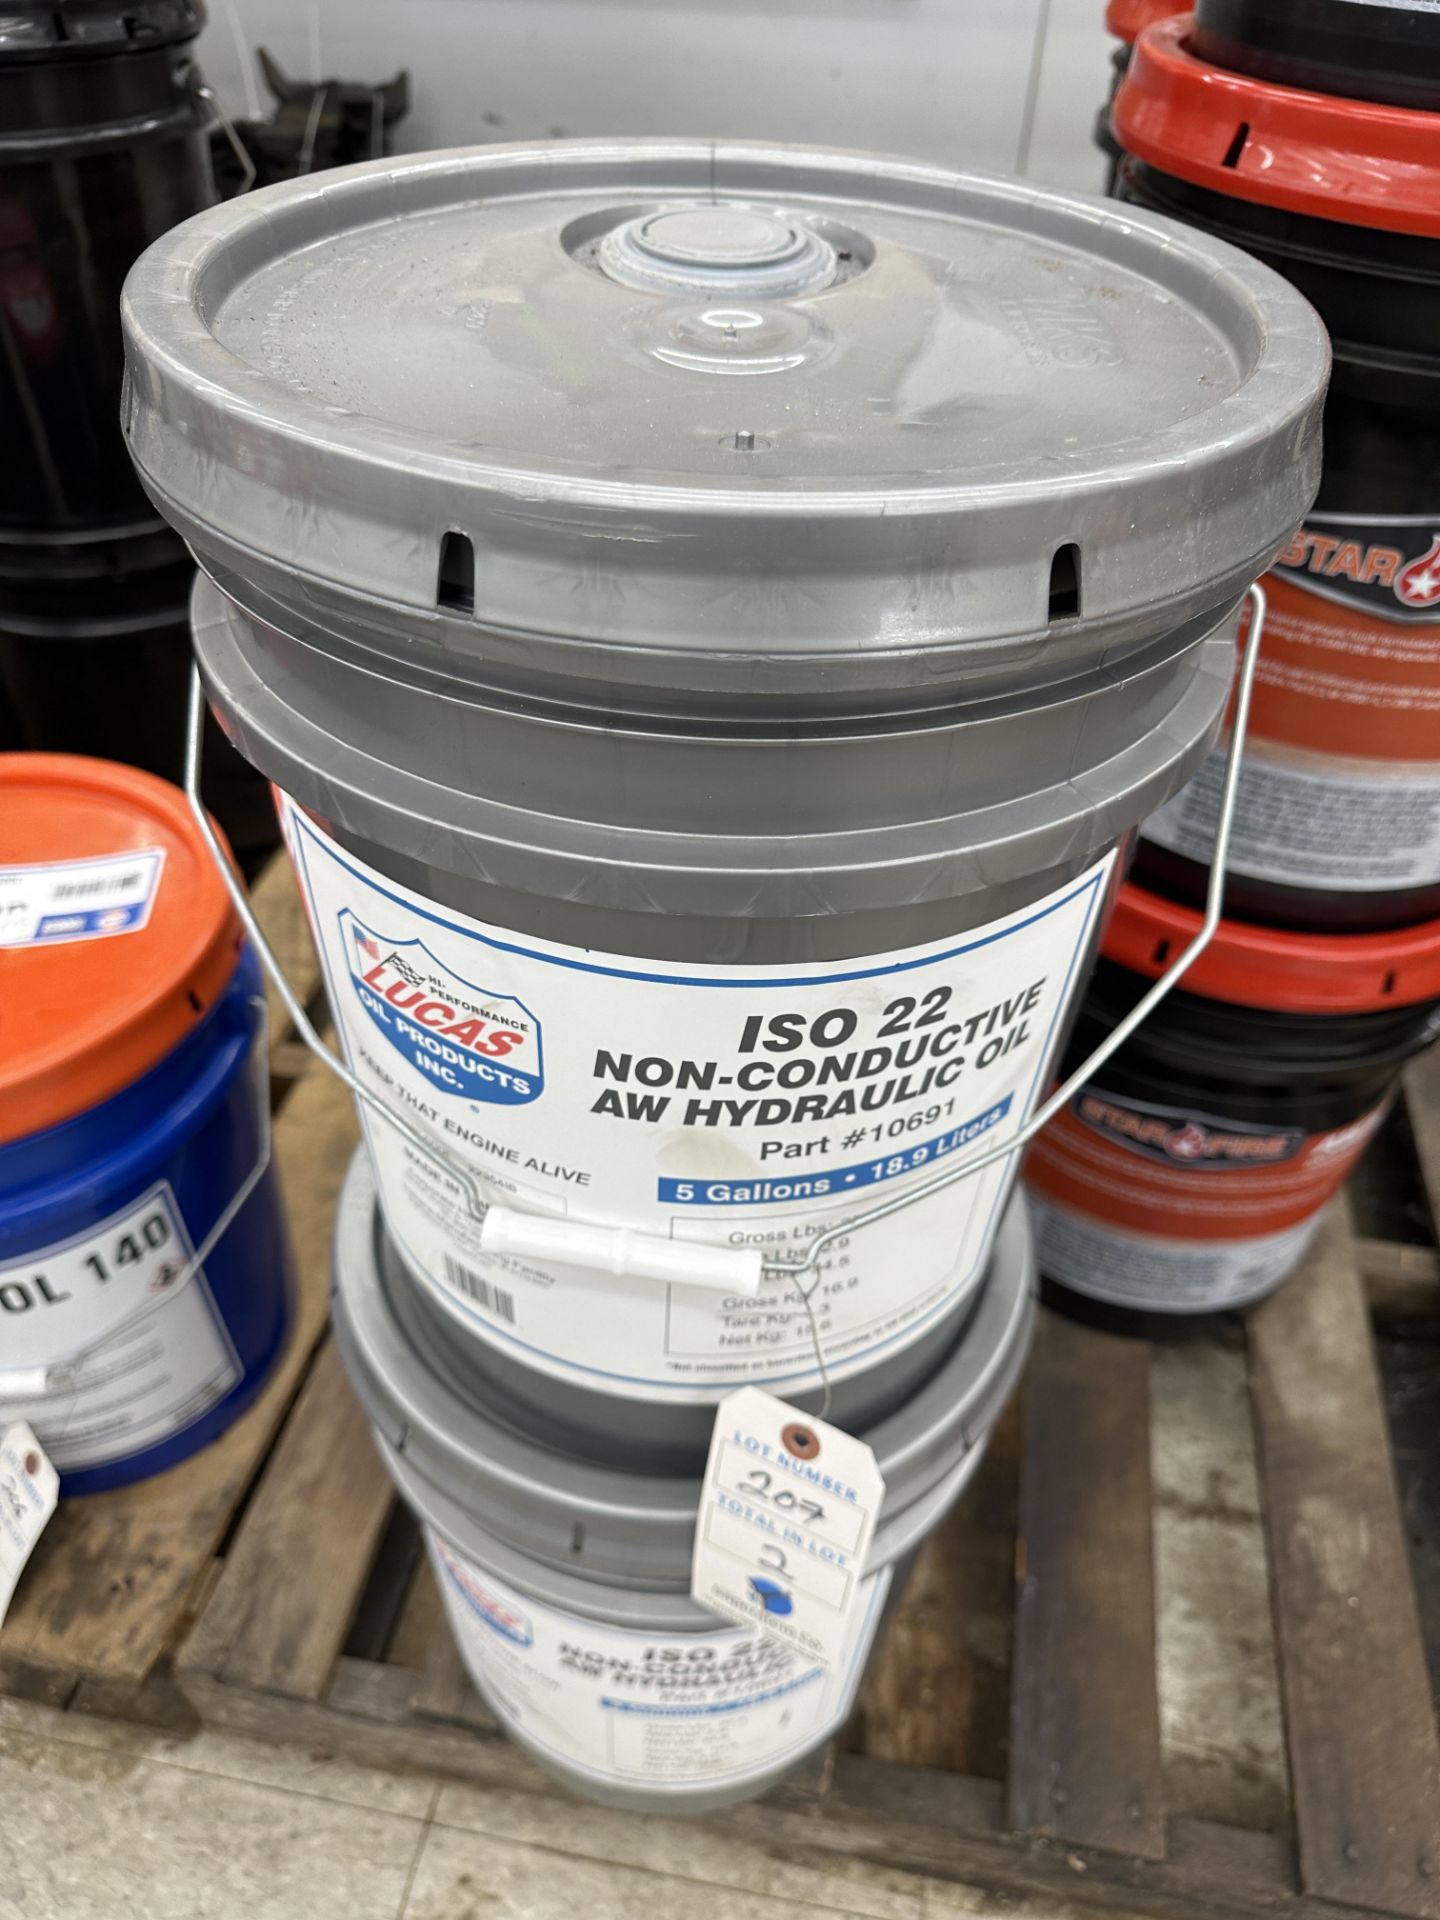 Star Fire 5 Gallon Pail 85-140 Gear Lubricant Fluid Being Sold by The Pail (Retail: $100)